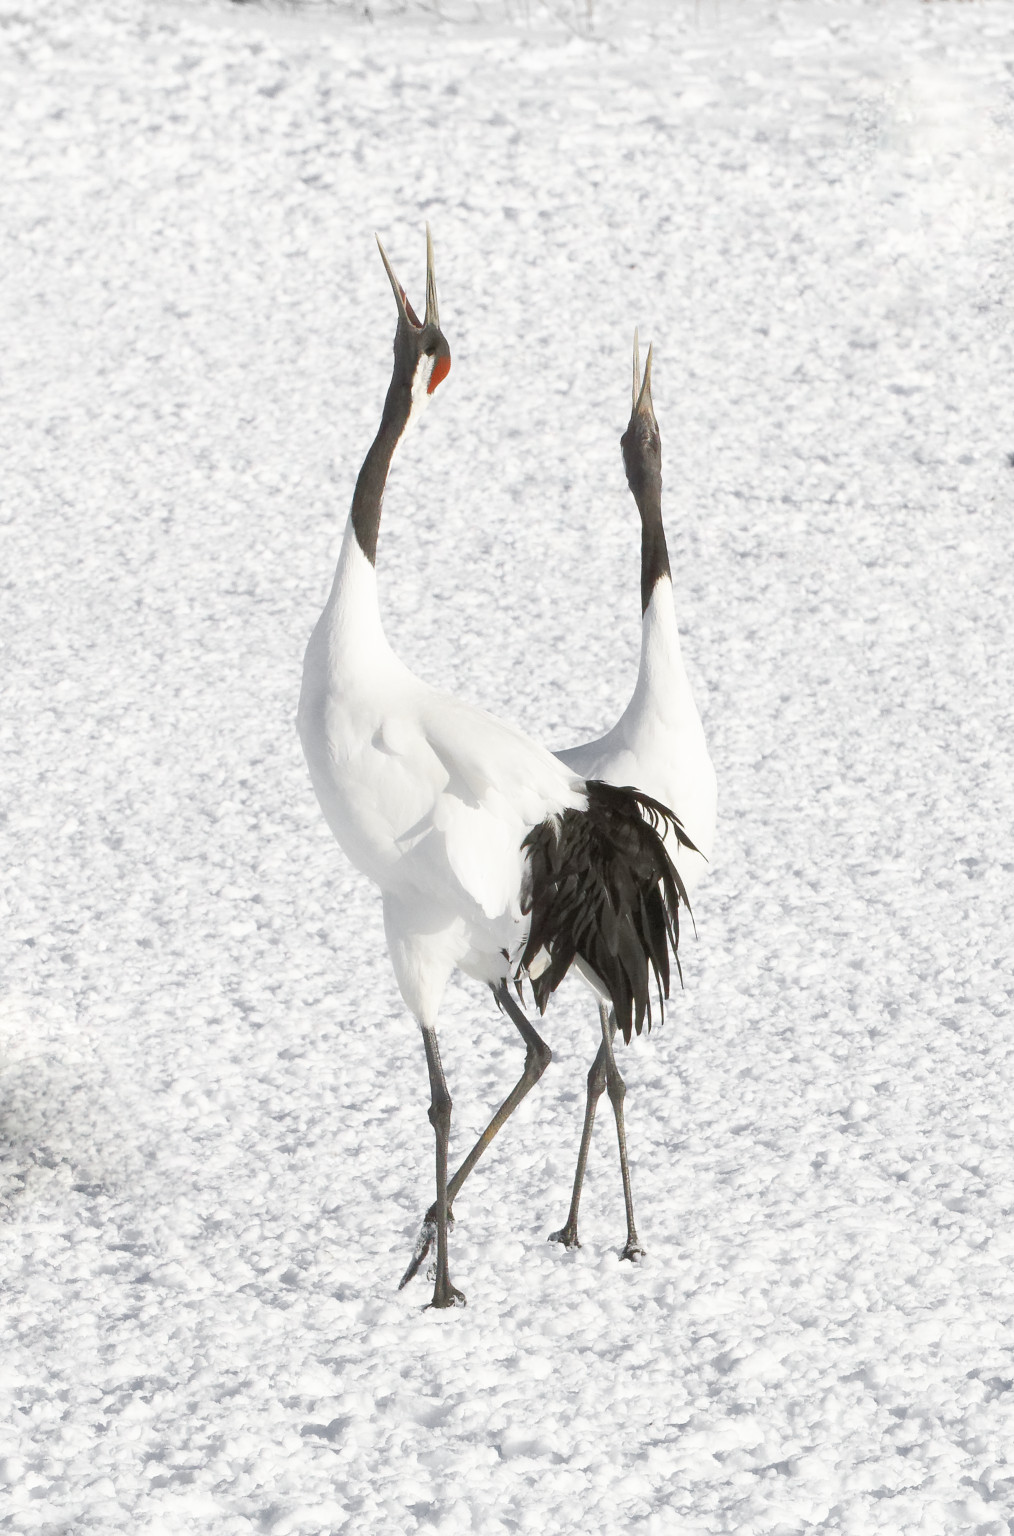 Red-crowned crane (Grus japonensis), also called the Manchurian crane or Japanese crane